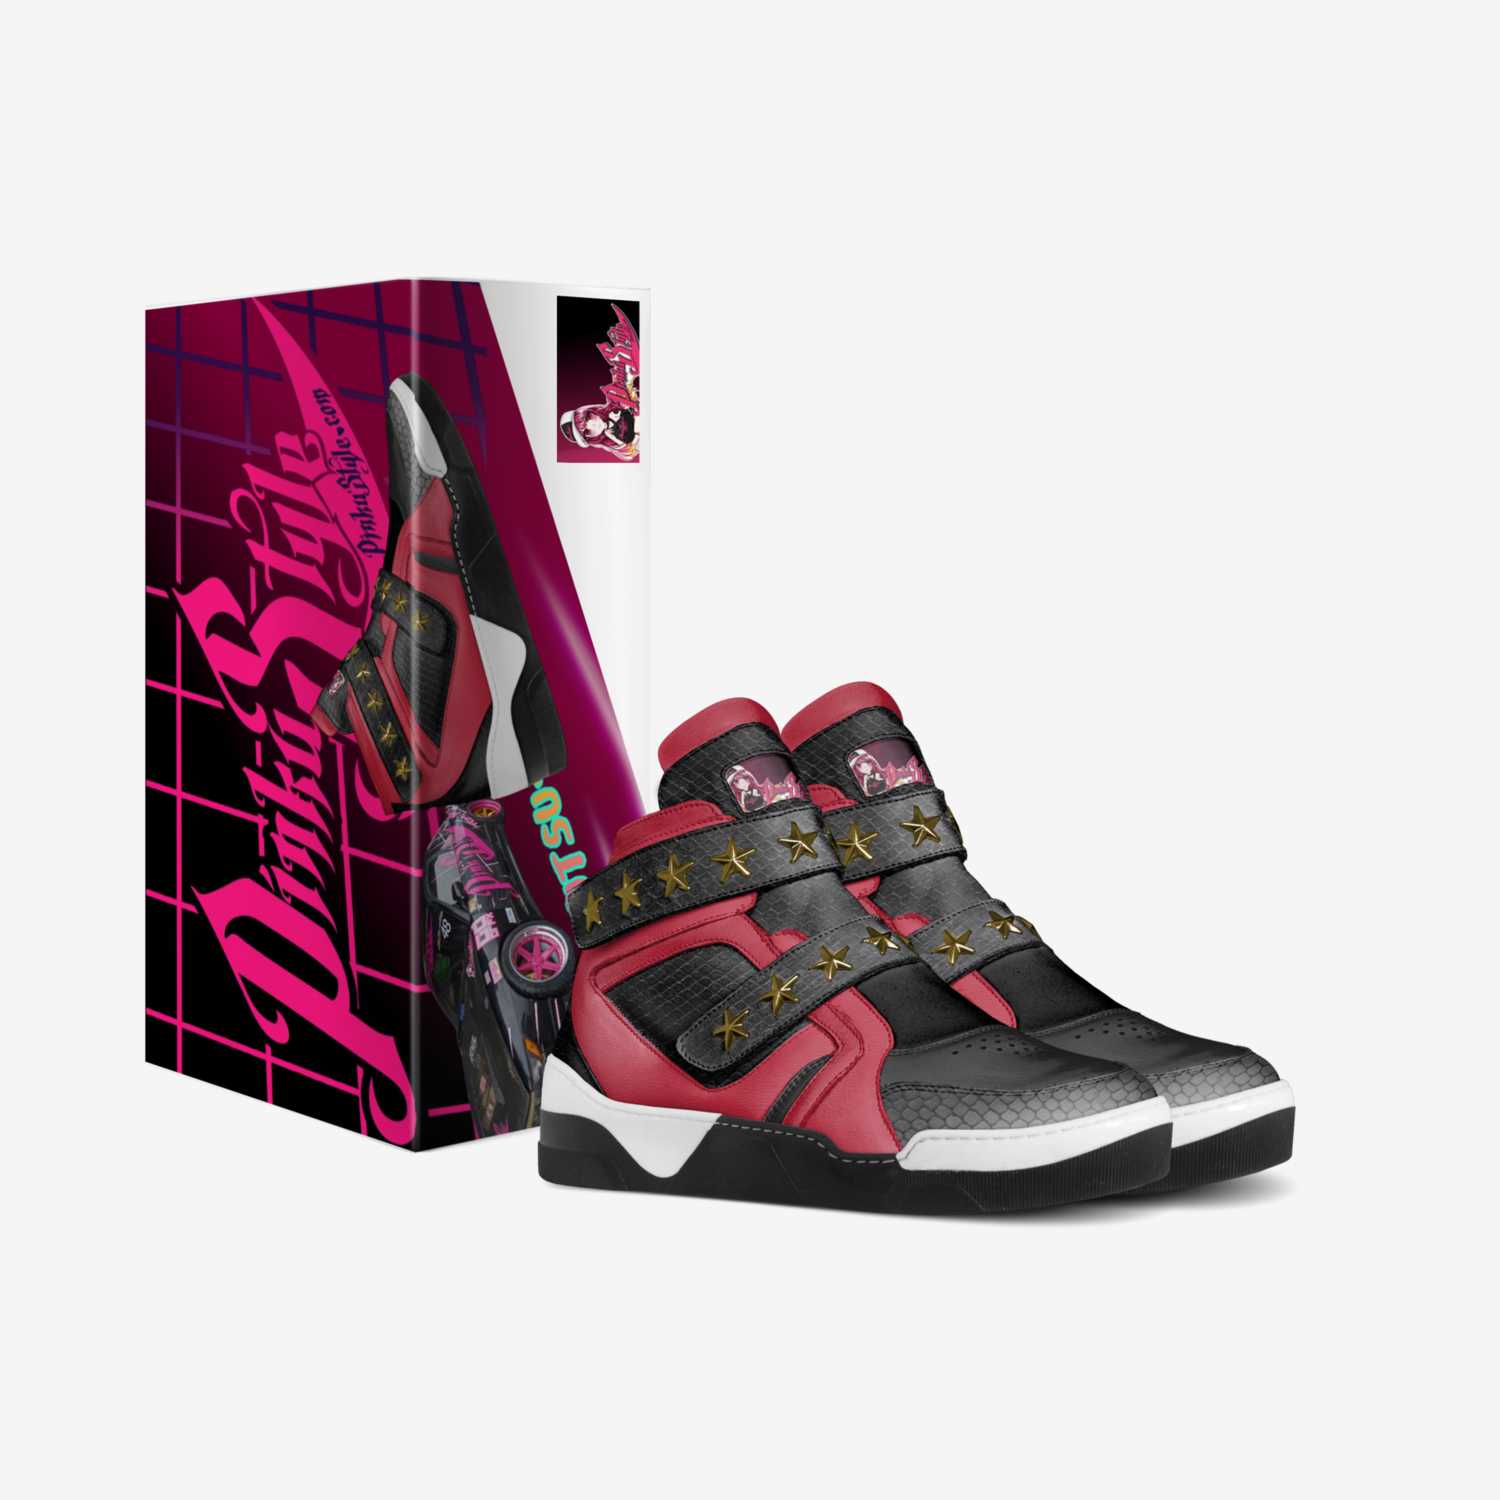 Pinkutsu-BNRs custom made in Italy shoes by Donald Jackson Jr. | Box view